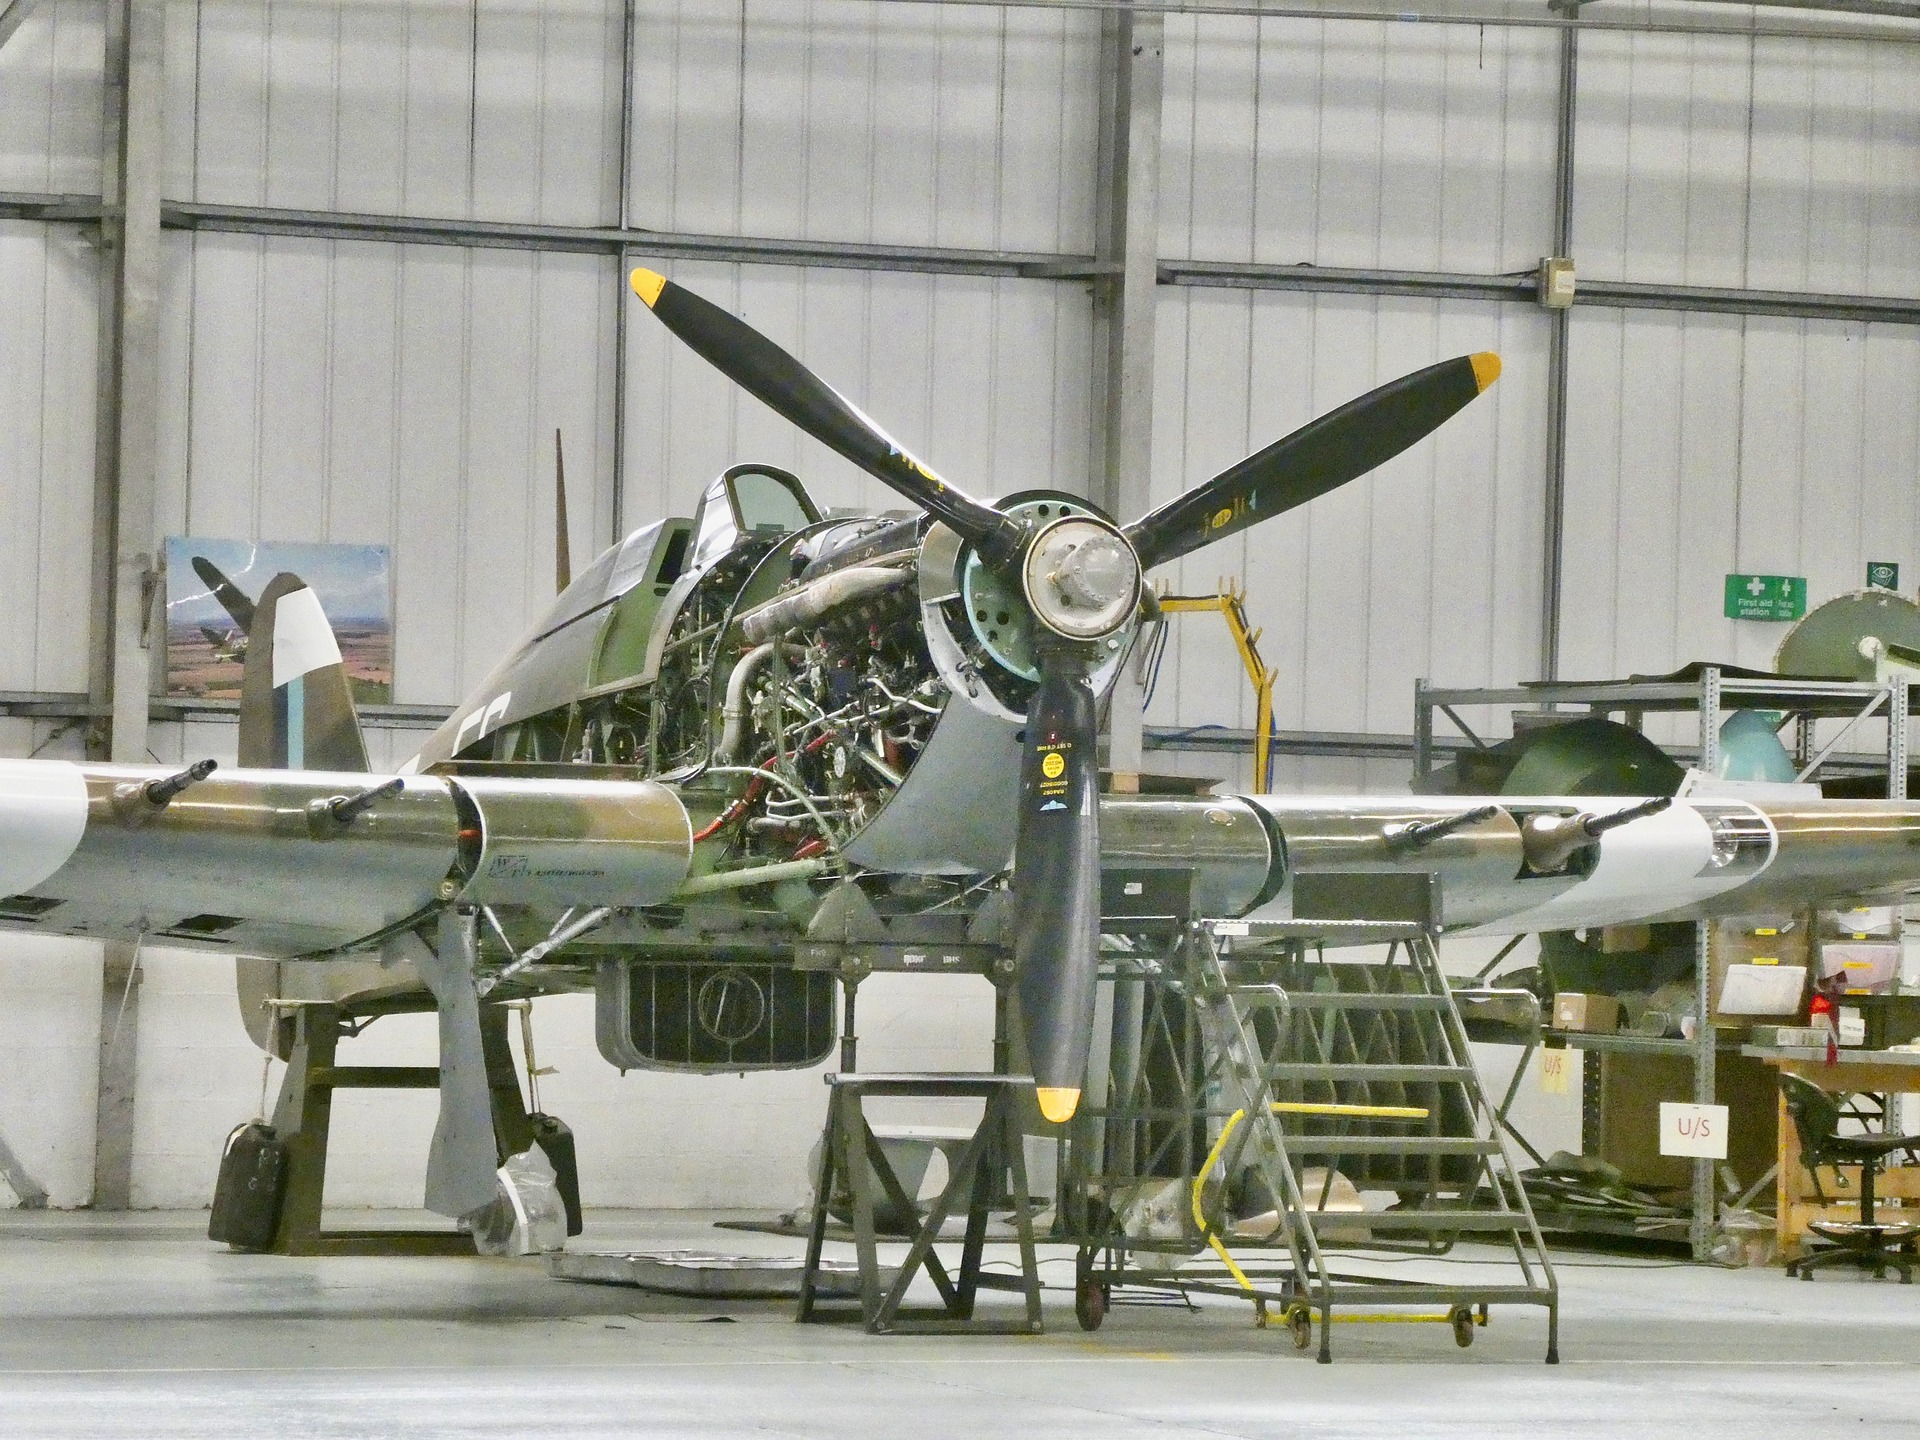 Preventive maintenance being performed on an aircraft in a hangar.